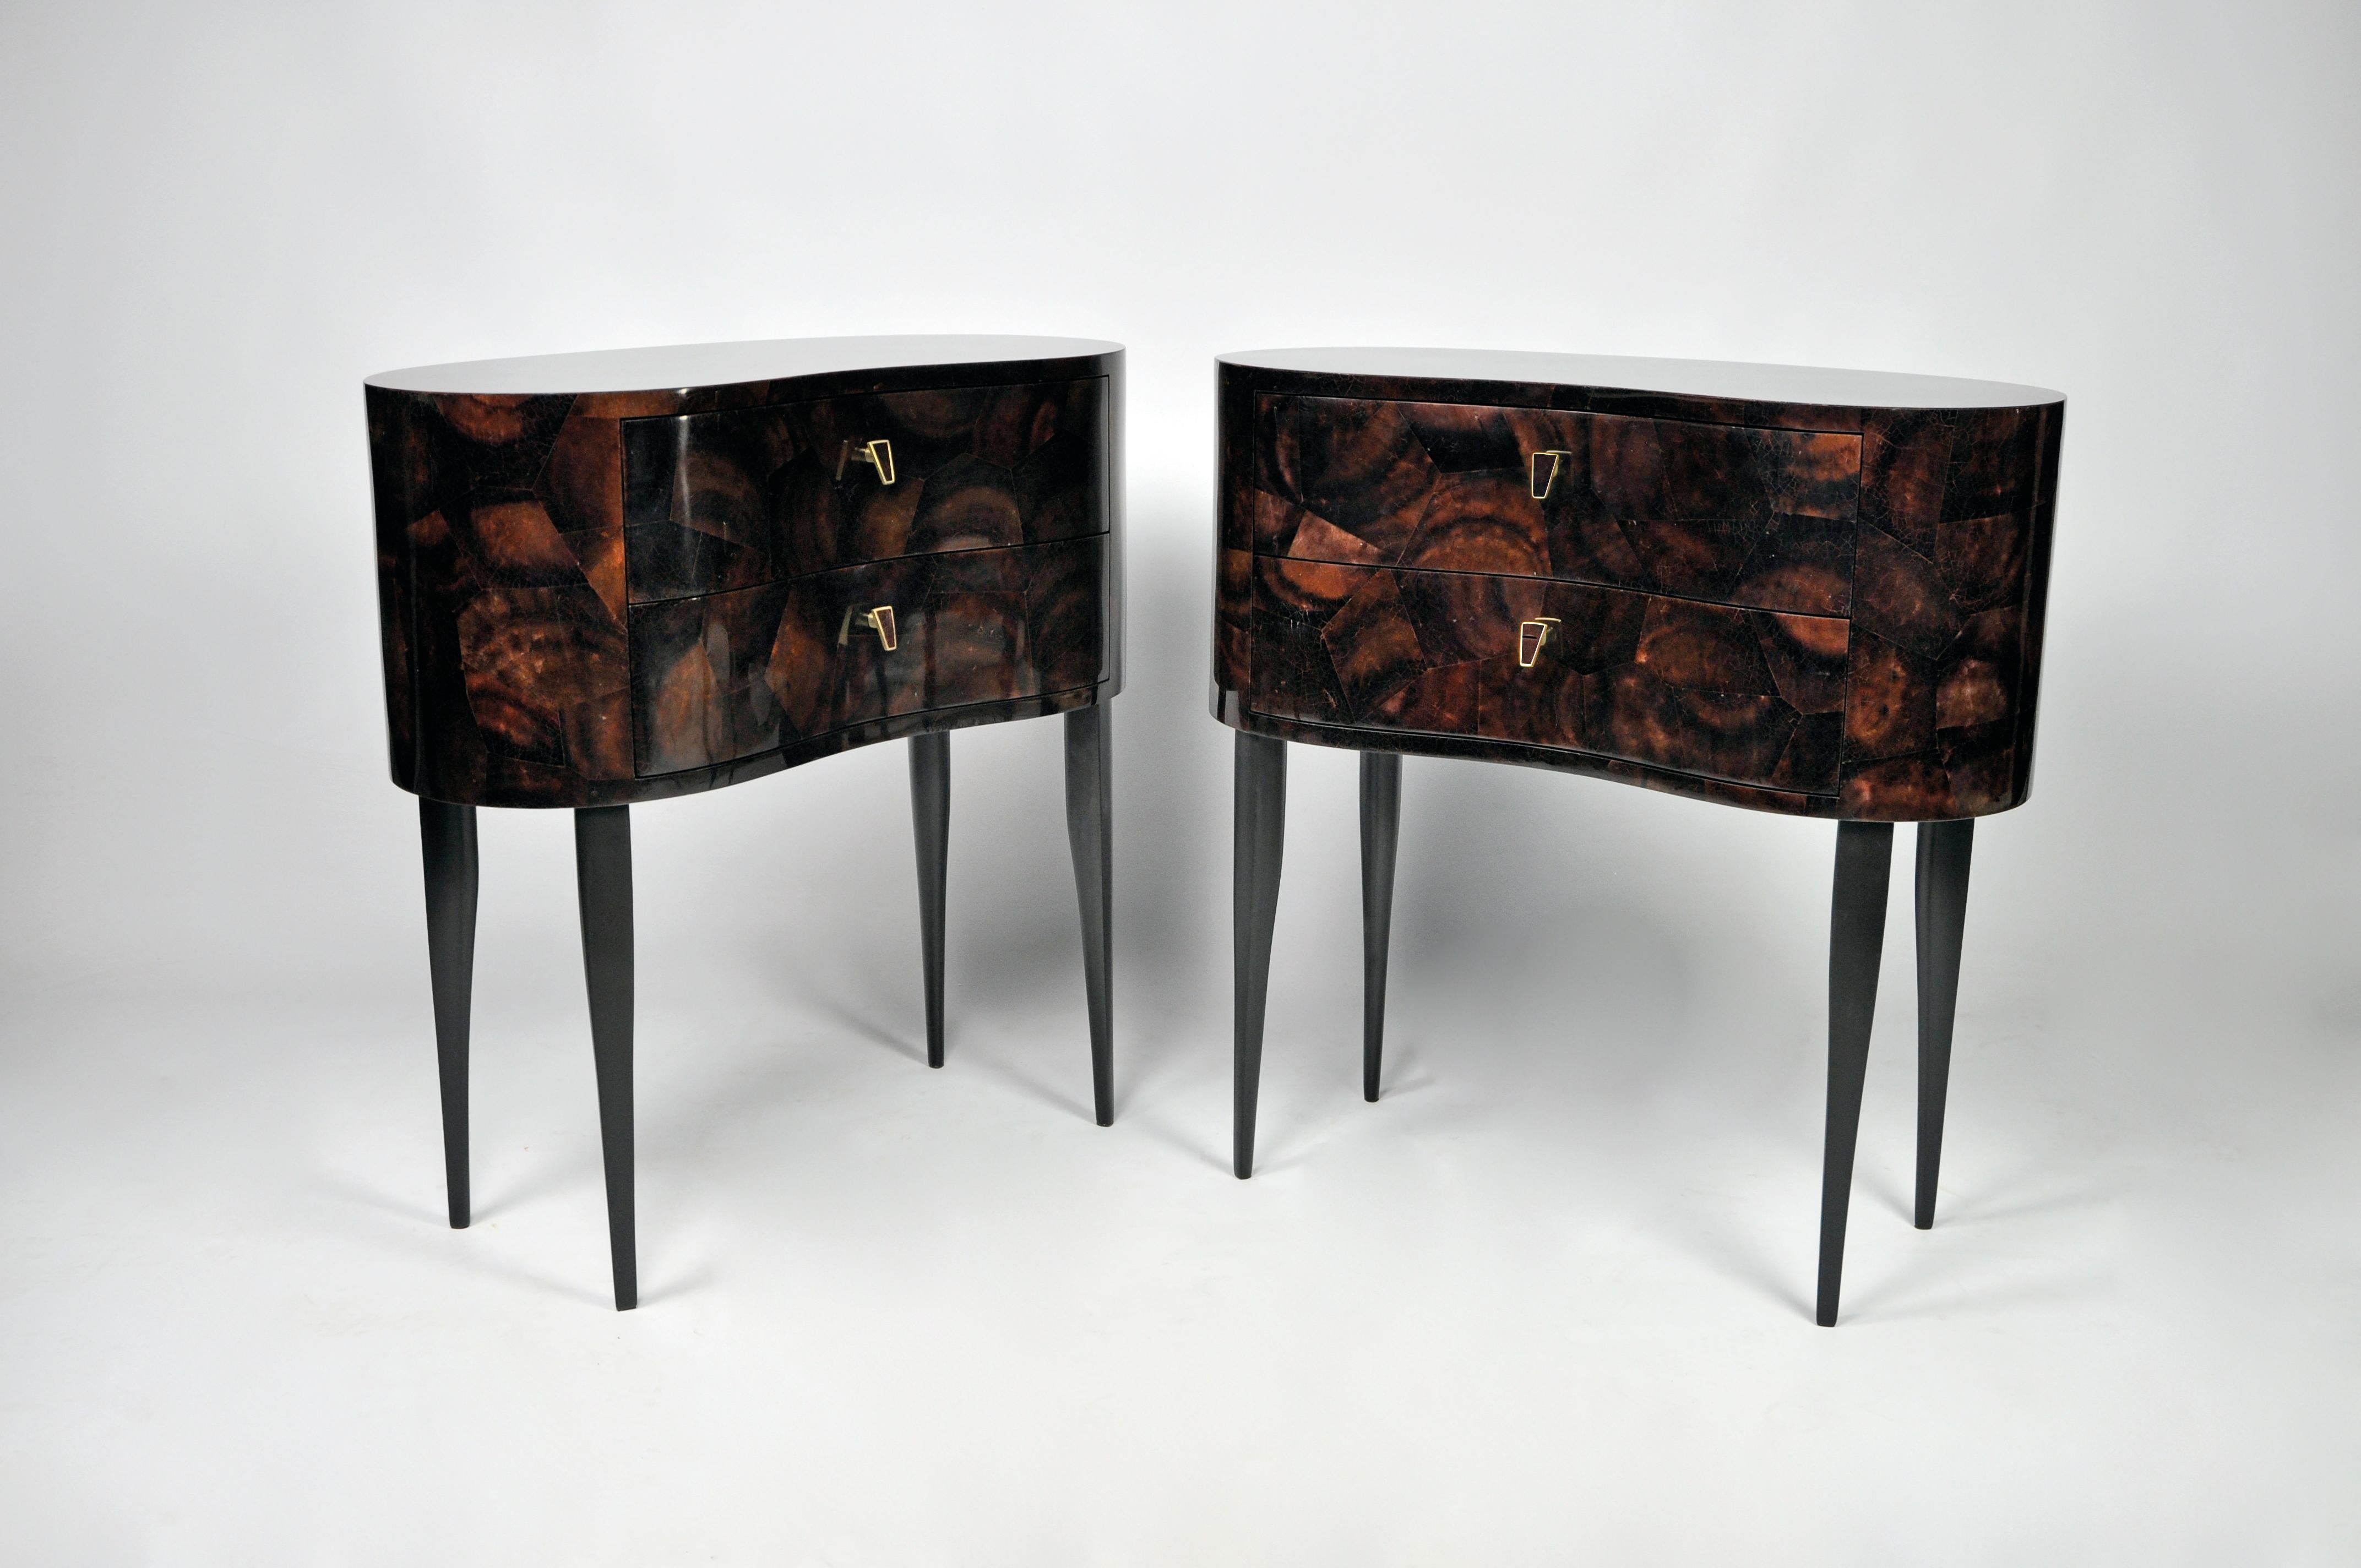 This bedside table is made of brown polished shell marquetry .
It has 2 drawers with brass and matching shell handles.
The legs are in black wood veneer.
The bean organic shape gives a very glamorous and sophisticated aspect to these tables.

The